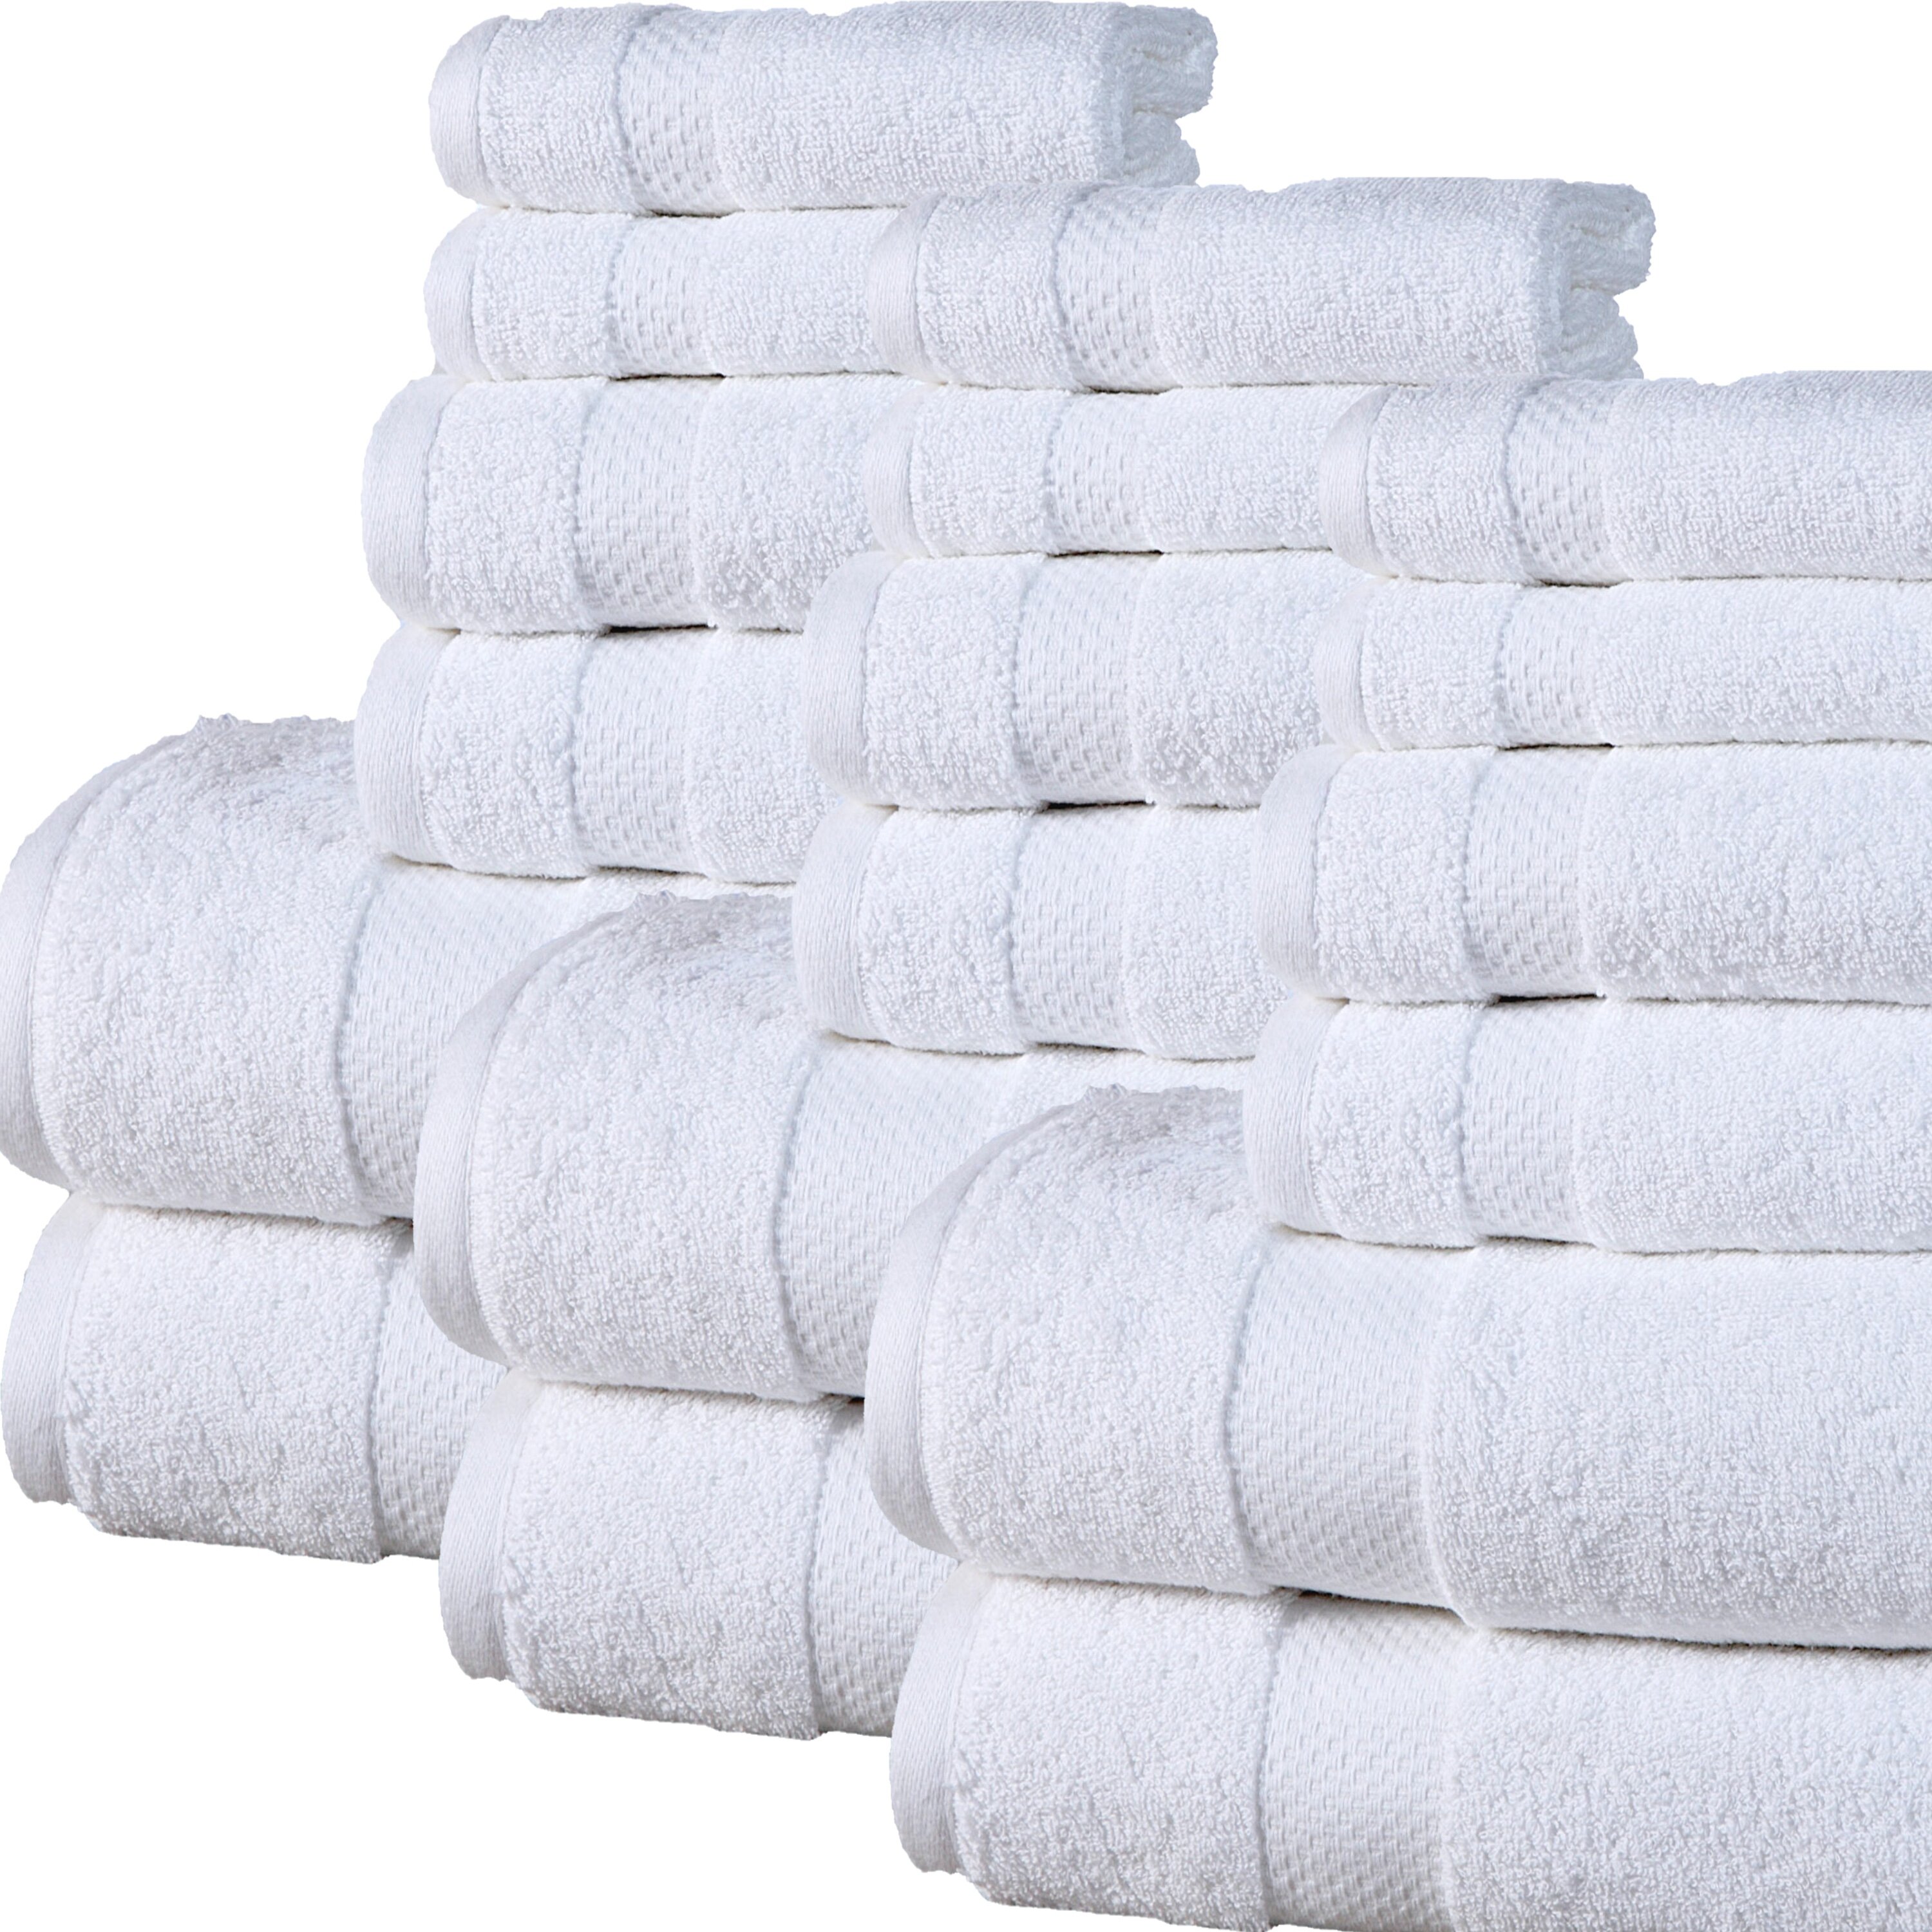 Hotel towels – 100% cotton economical bath Mats or Rugs for